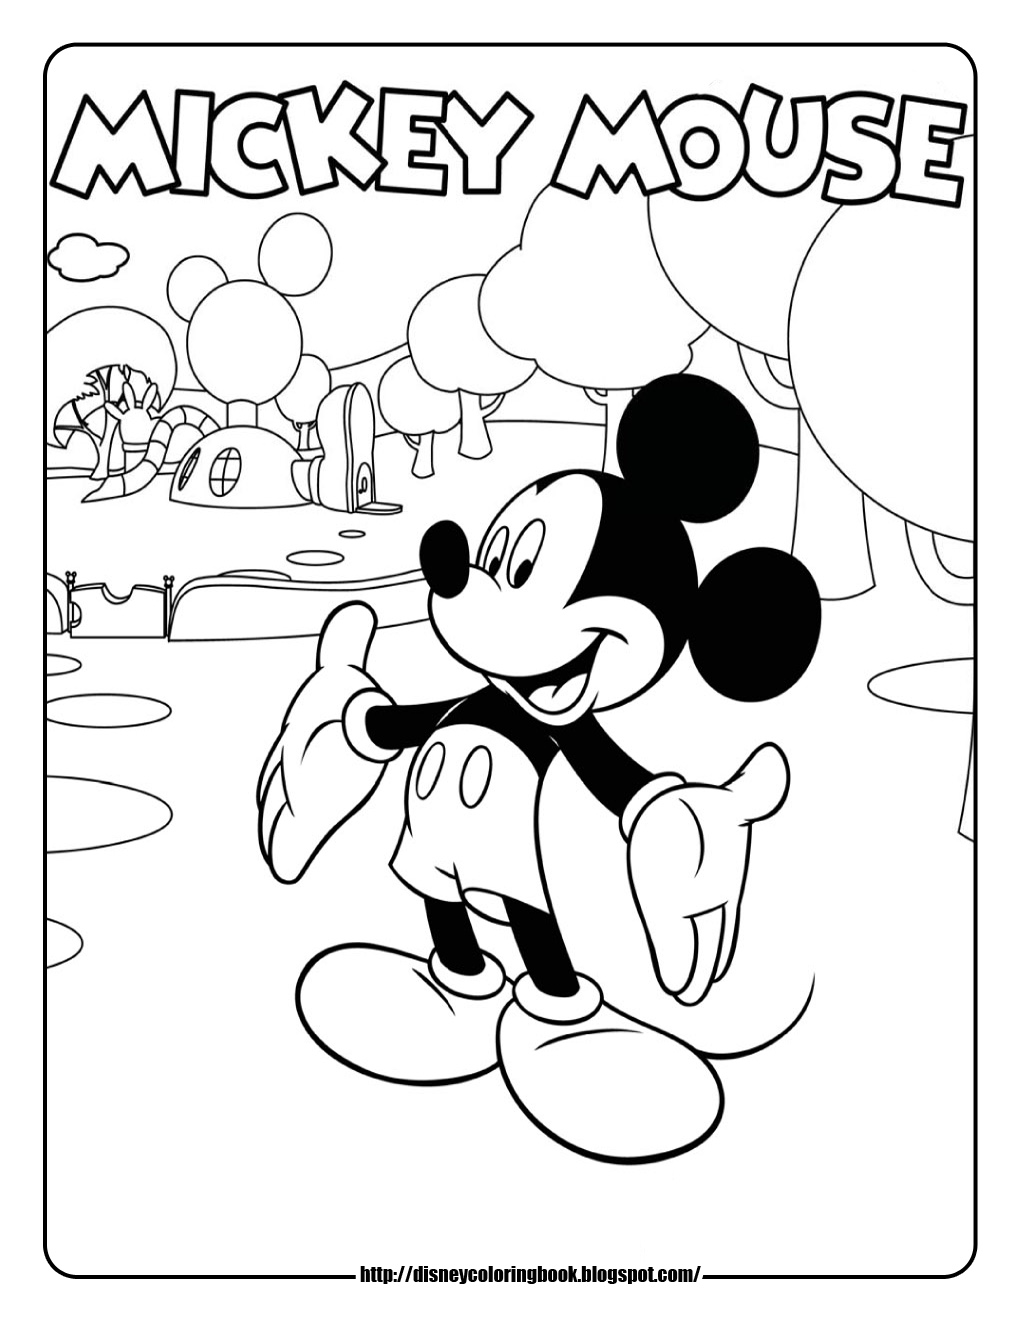 Free Mickey Mouse Coloring Pages Pdf